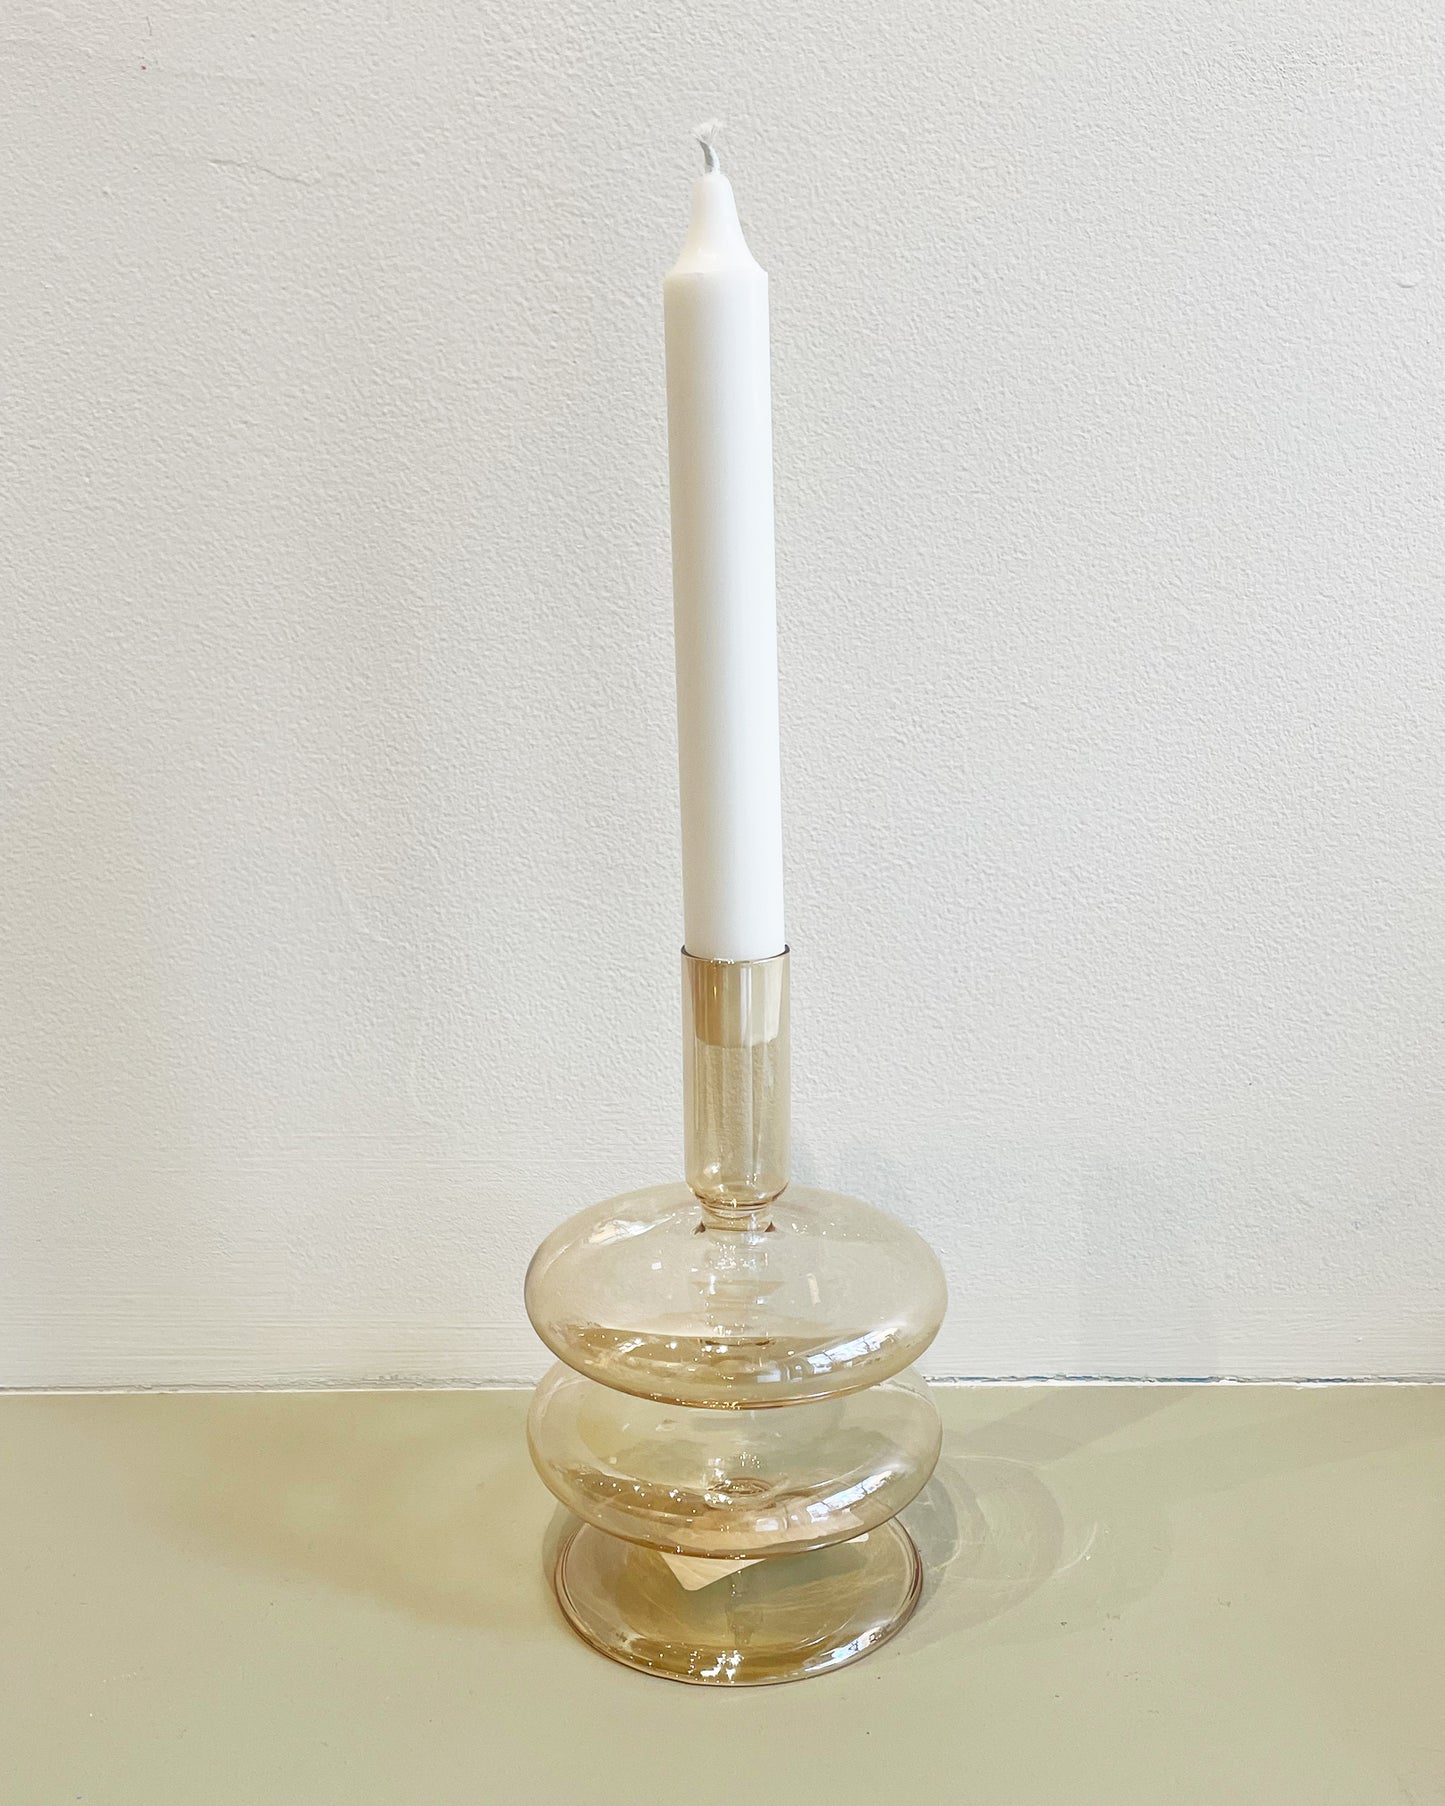 9 CHRISTOPHER Finn Glass Candlestick in Iridescent Brown available at Lahn.shop